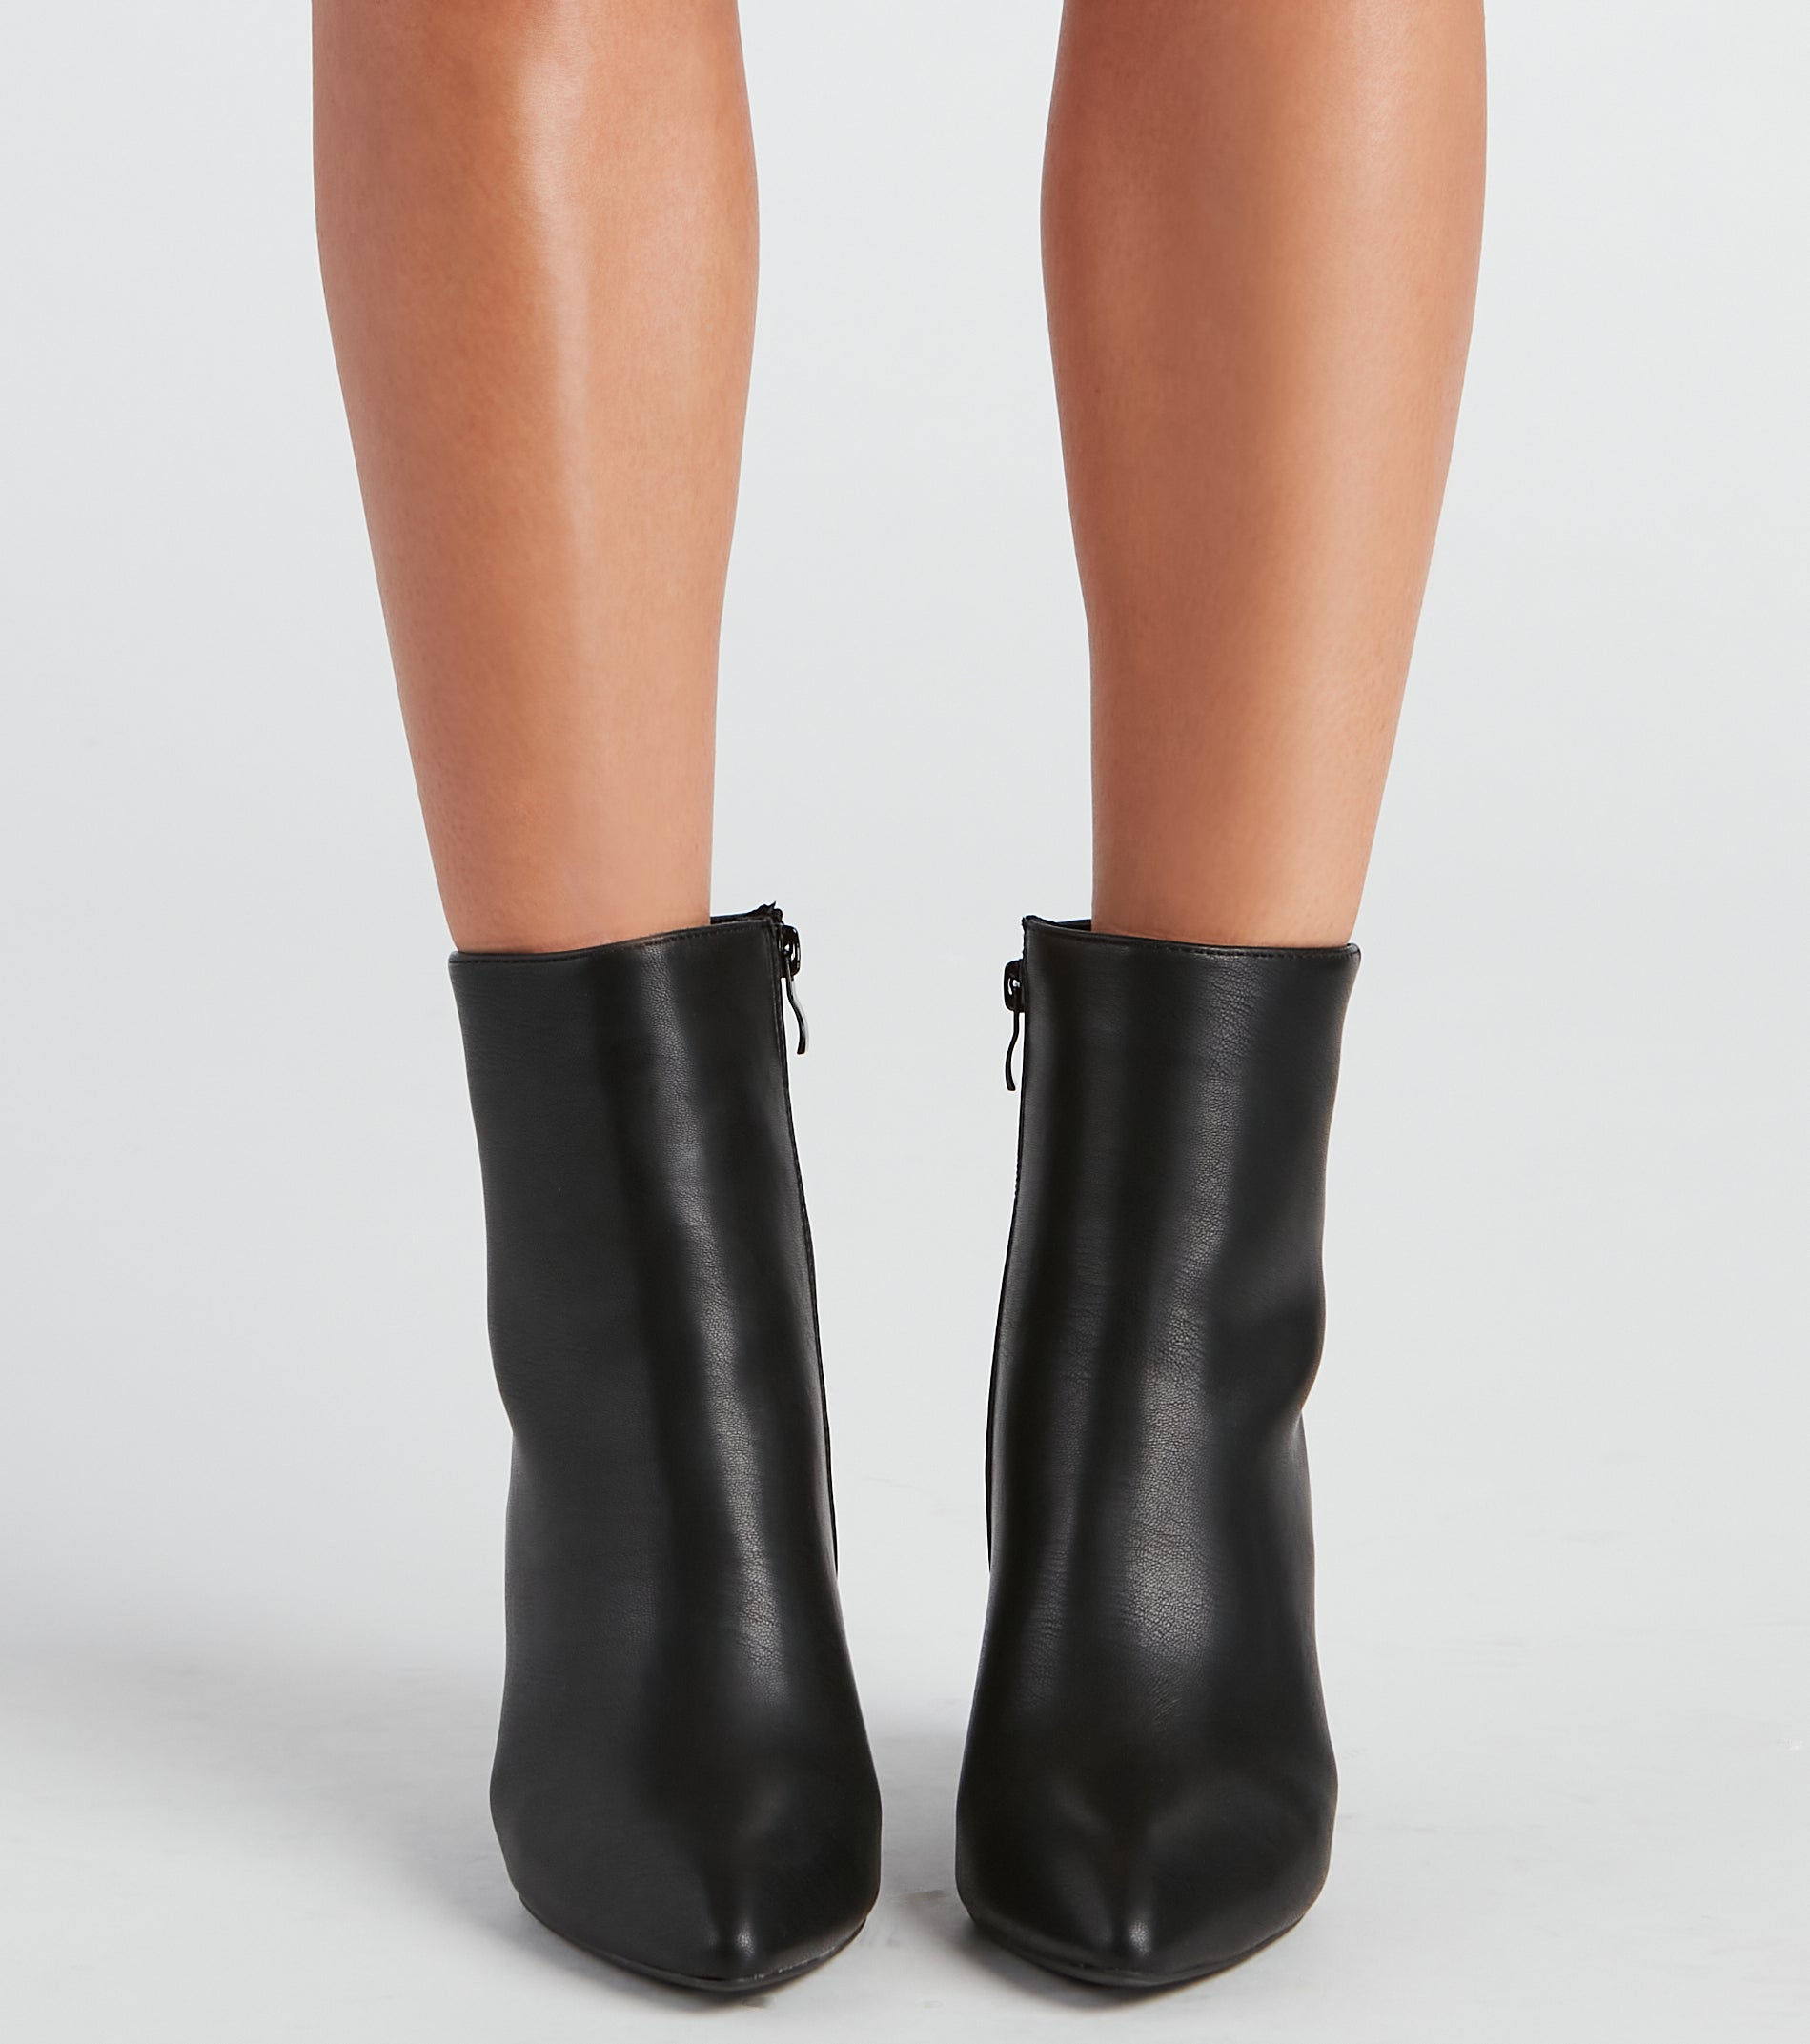 Back To Basics Faux Leather Ankle Booties